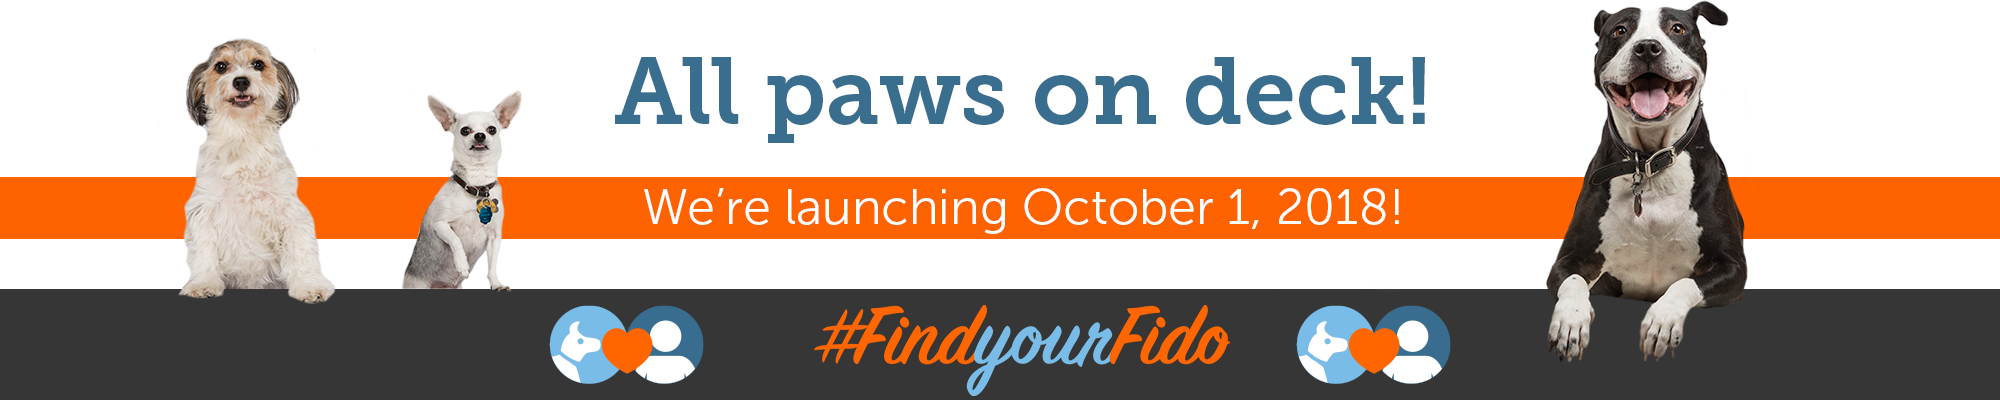 Find Your Fido - Coming Soon